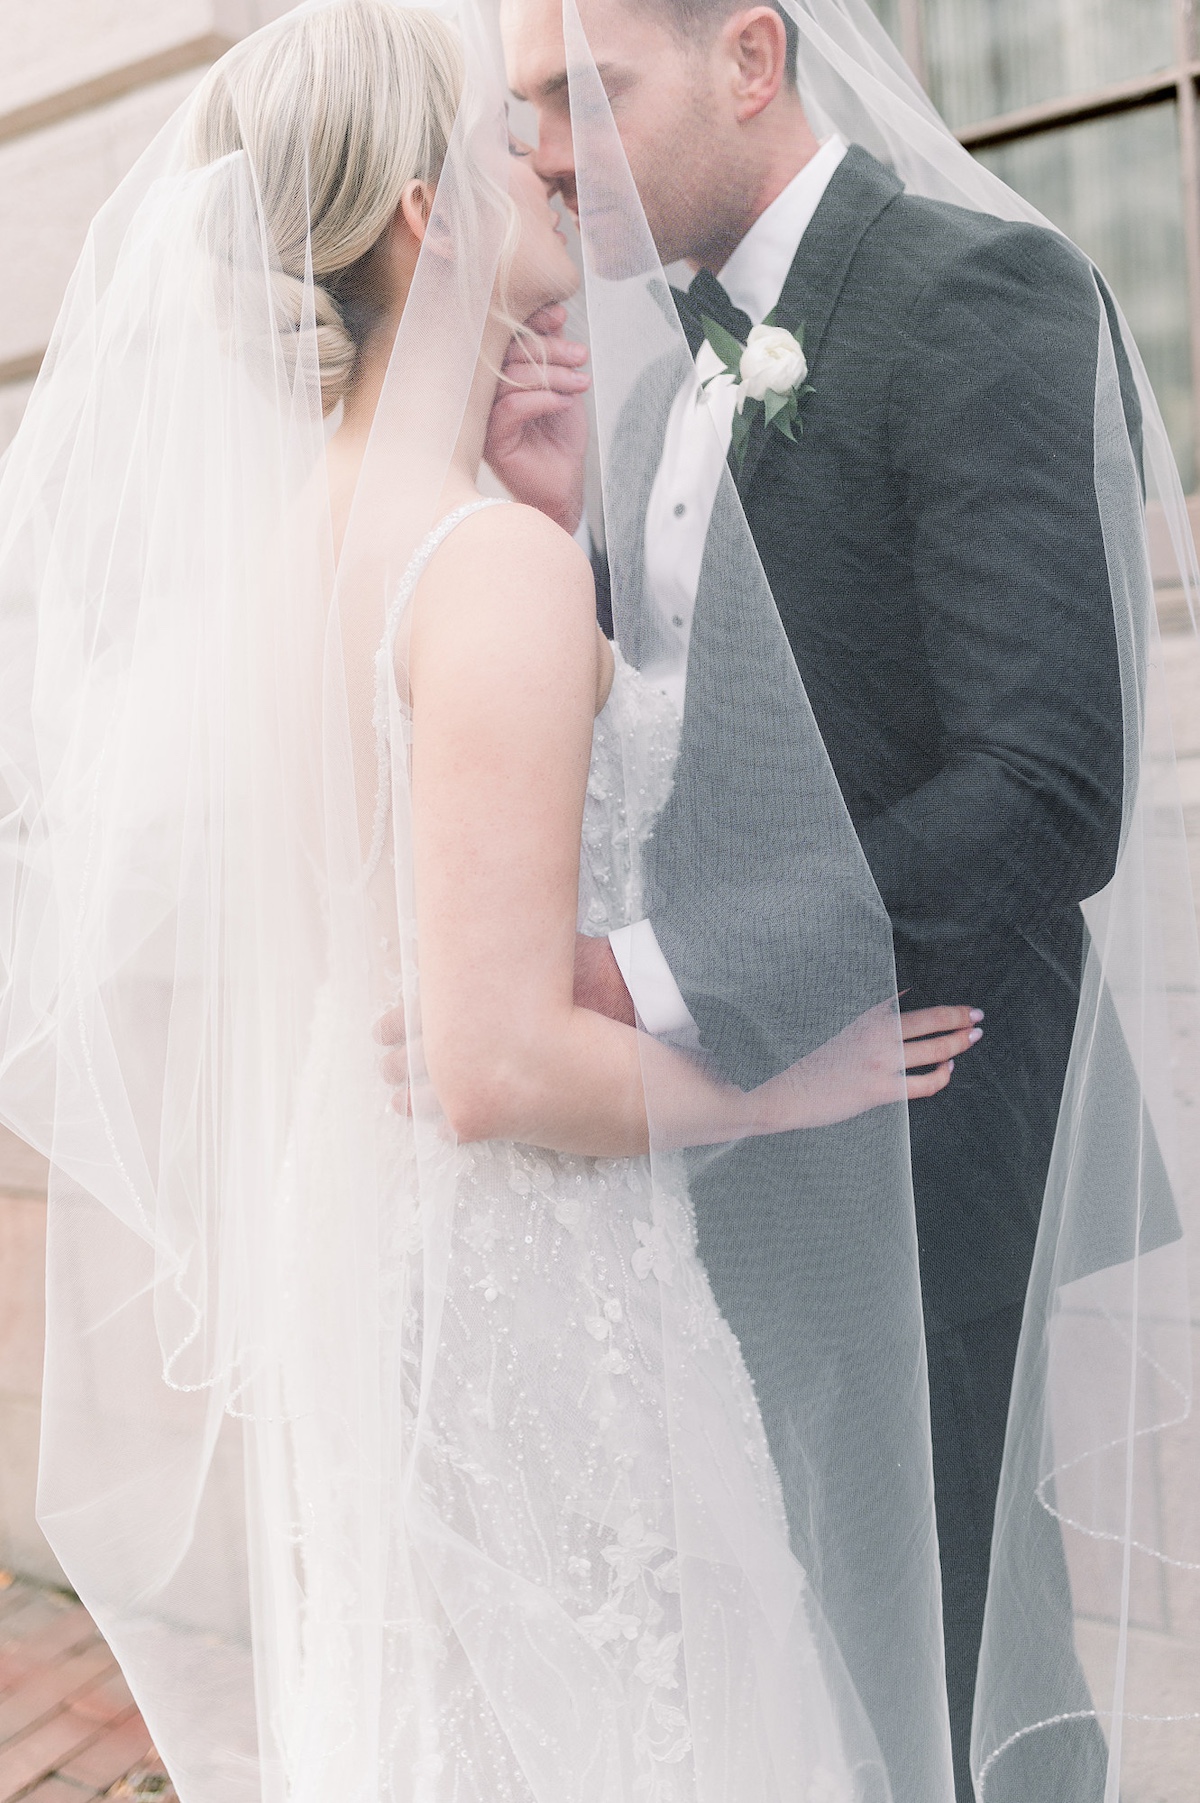 Lancaster City's elegance unfolds in this portrait featuring the bride's veil, a high-end capture of the delicate details against the city's classic charm.